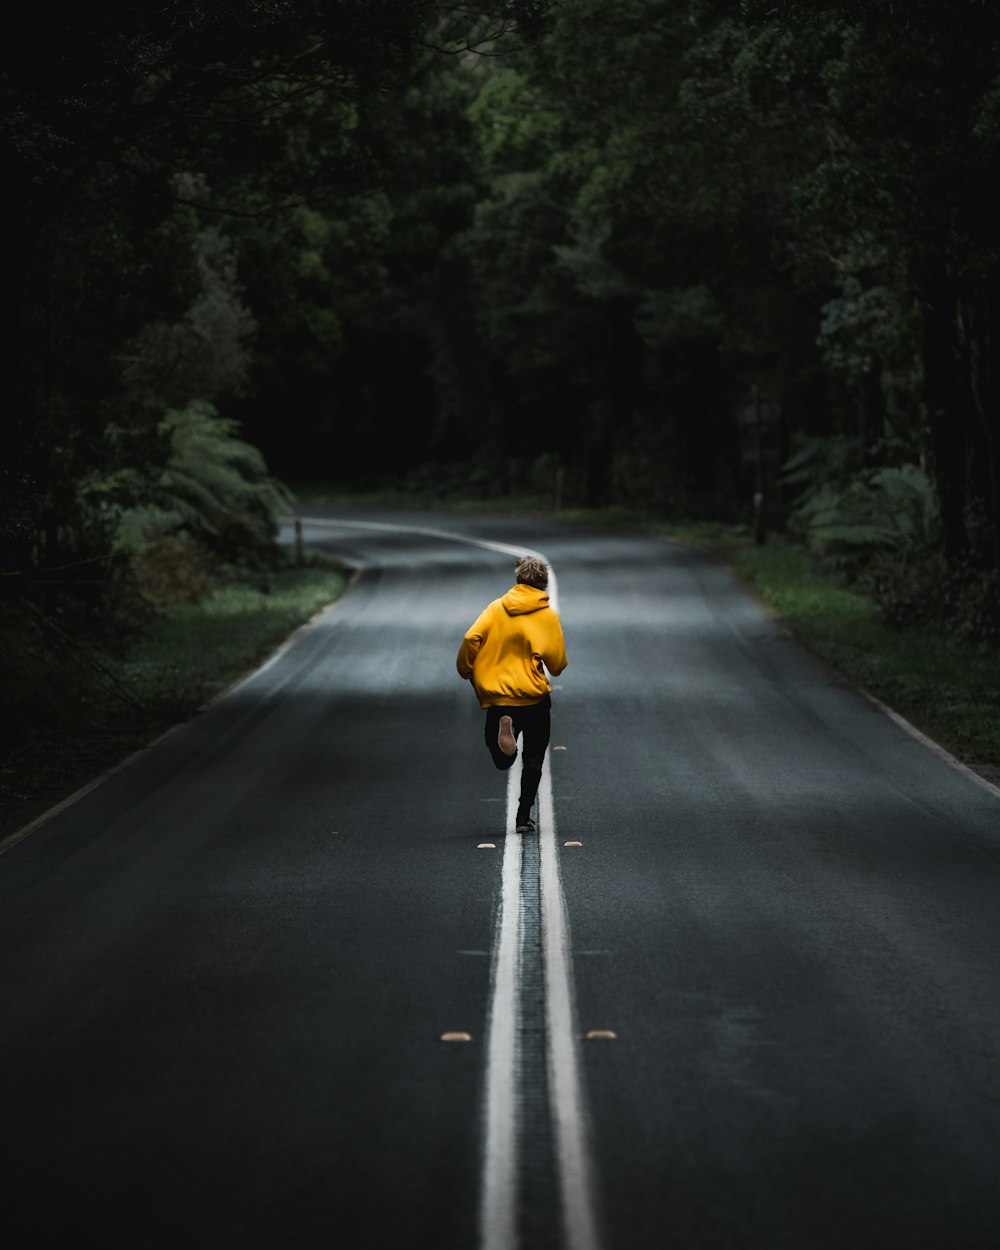 a person in a yellow jacket is skateboarding down a road